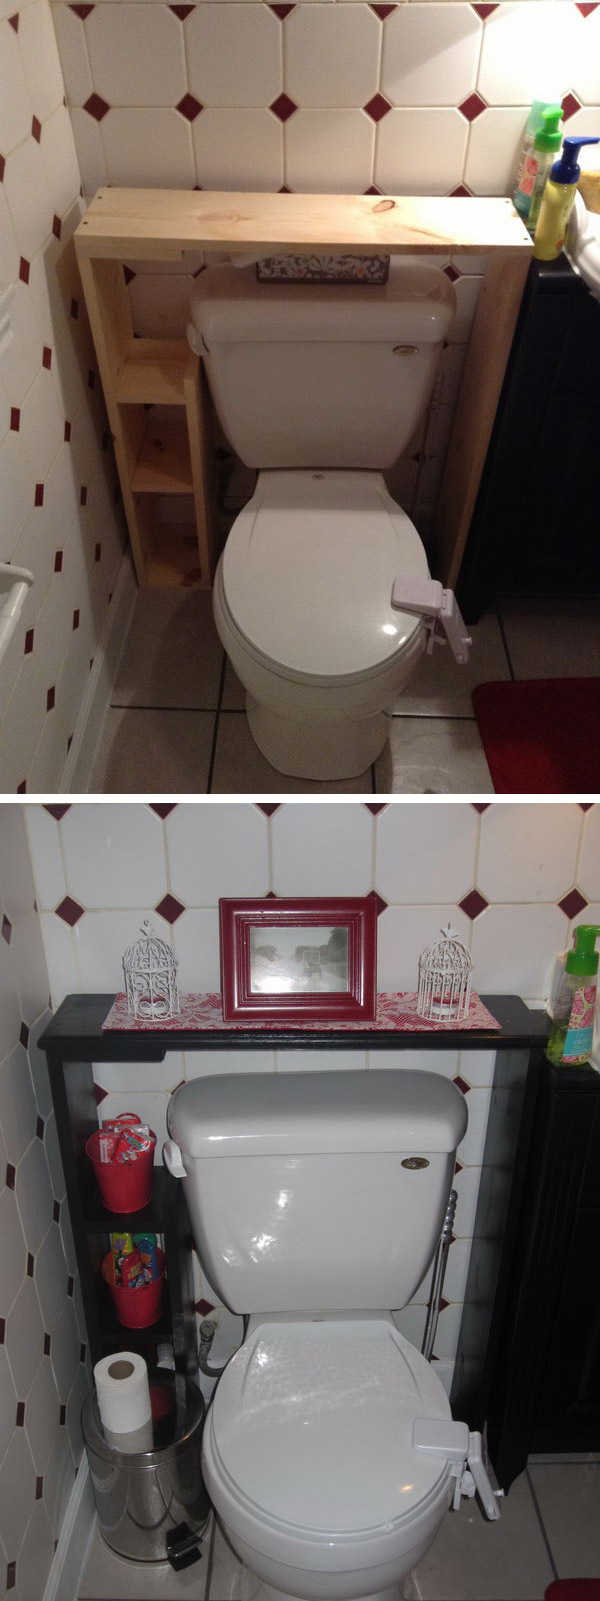 DIY Shelf Over The Toilet For More Storage Space 